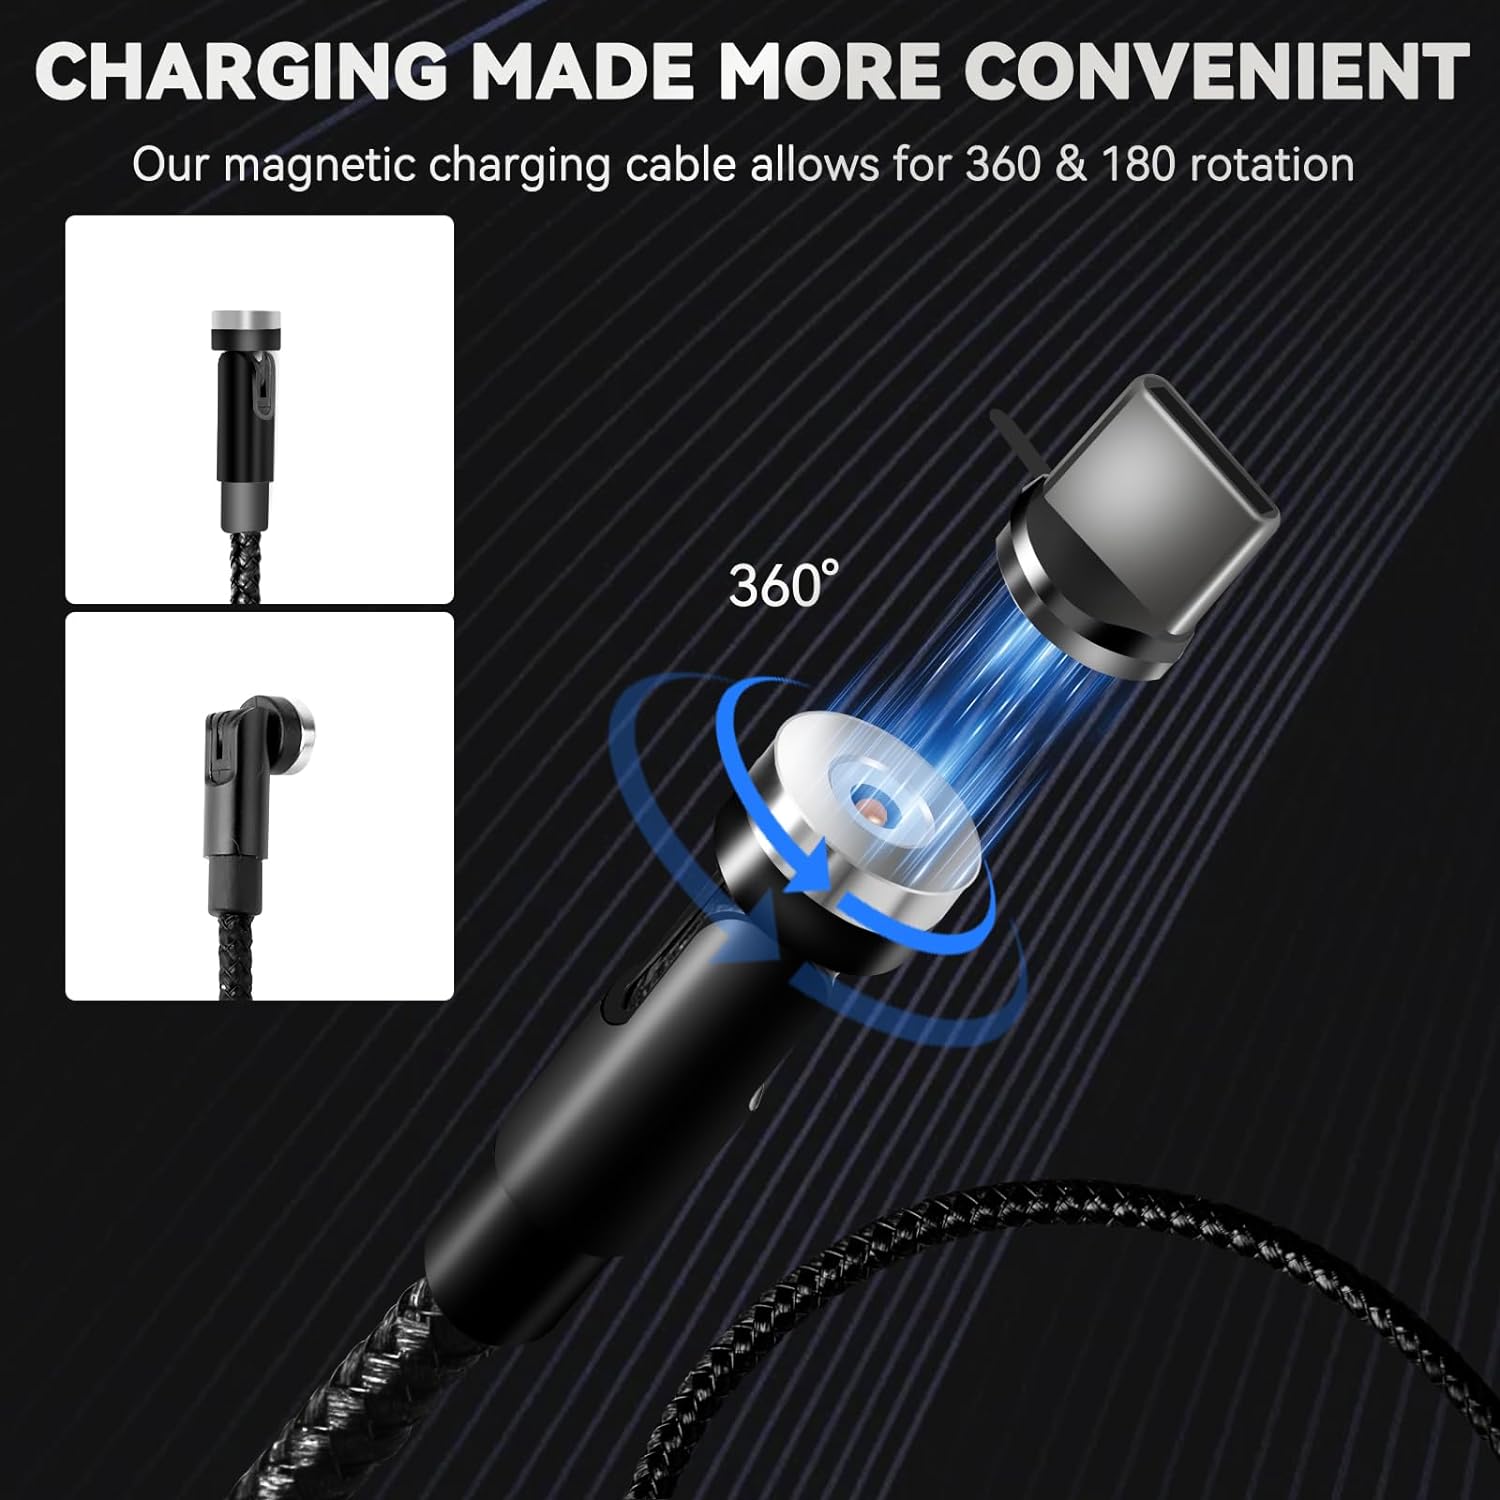 LHJRY Rotating Magnetic Multi Charging Cable, 4ft 6-in-1 Multiple Charger Cord Universal USB Magnetic Charge Cord Compatible with Phone/Micro USB/TypeC All Devices